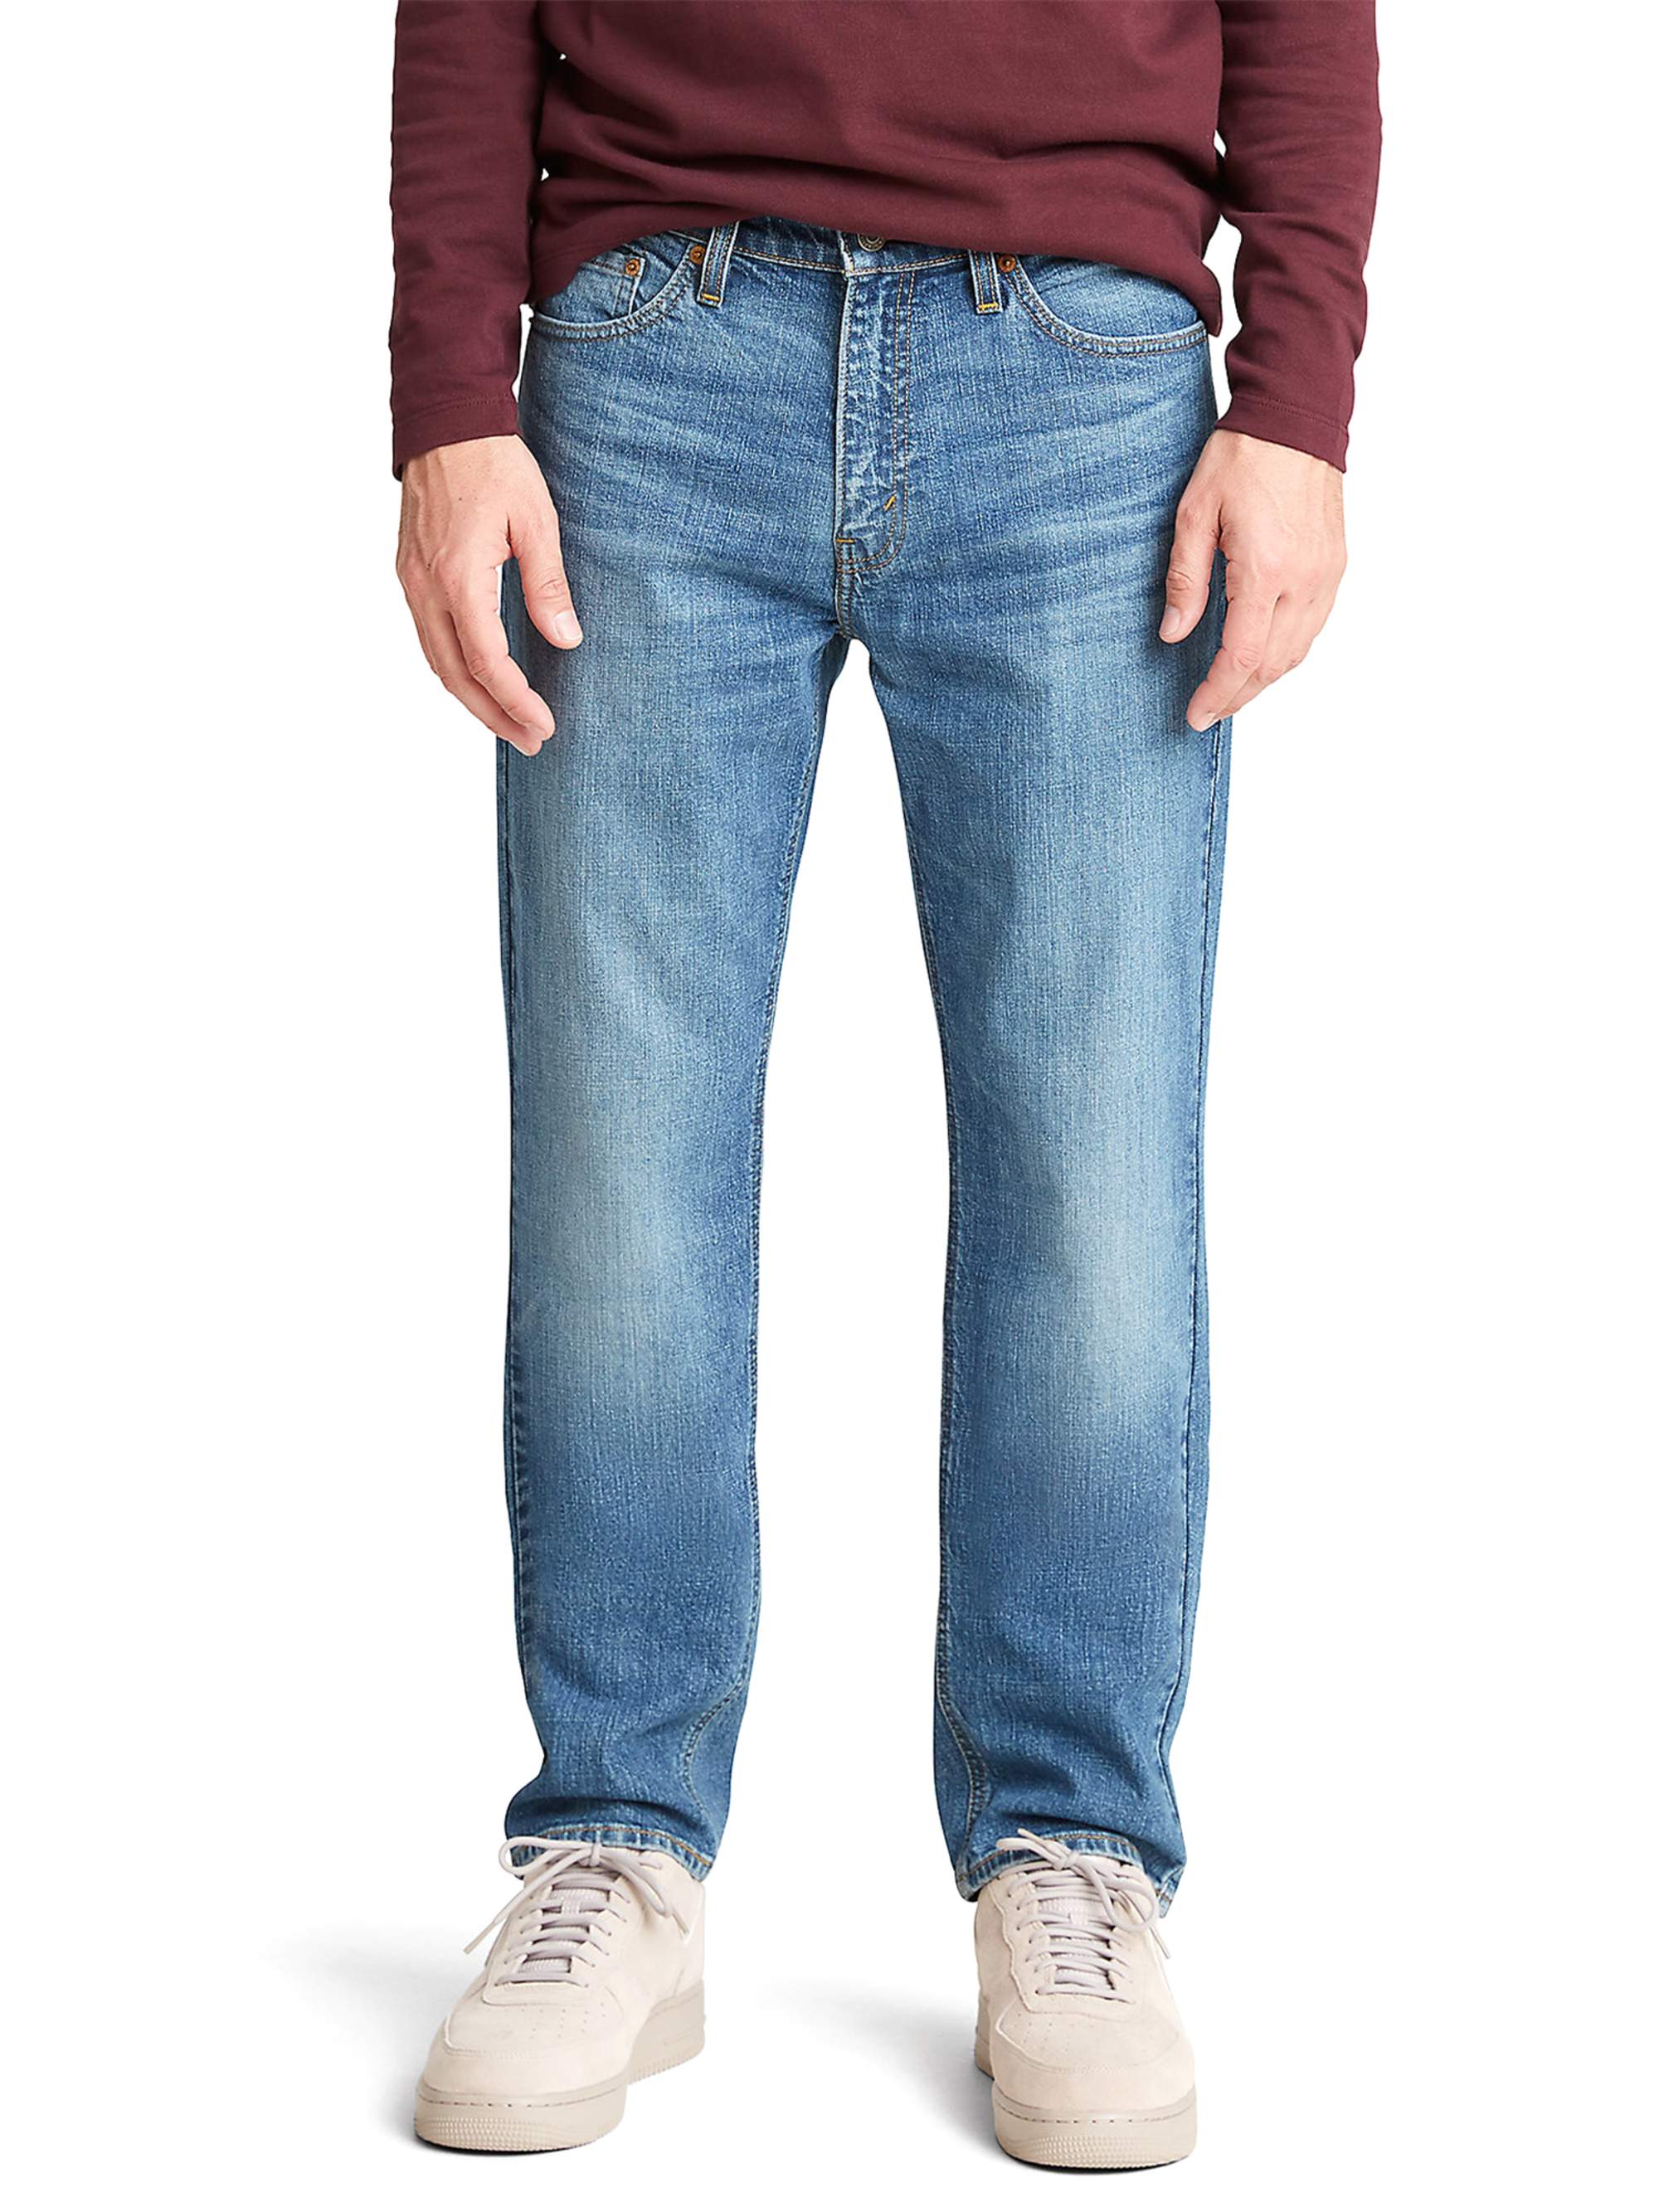 Signature by Levi Strauss & Co. Men's Athletic Fit Jeans - image 1 of 4